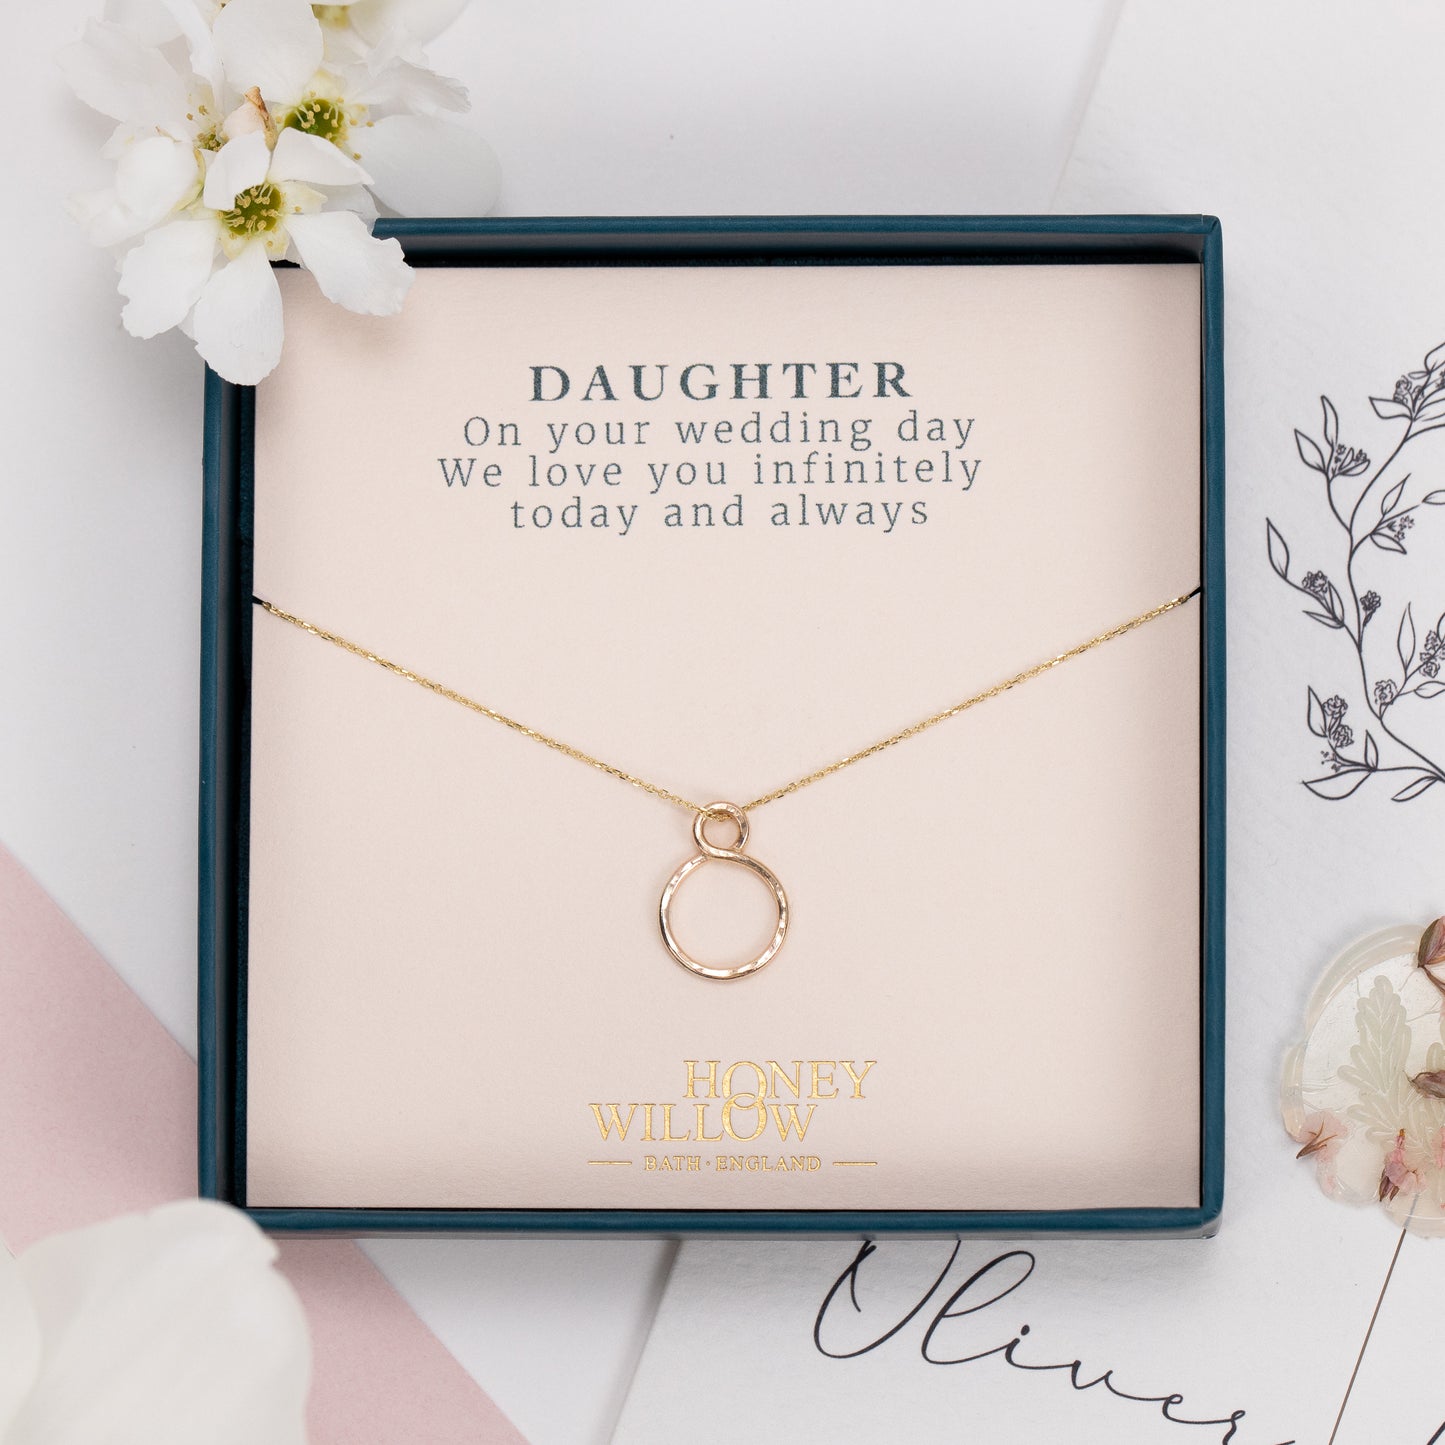 Wedding Day Gift for Daughter - Infinity Necklace - 9kt Gold